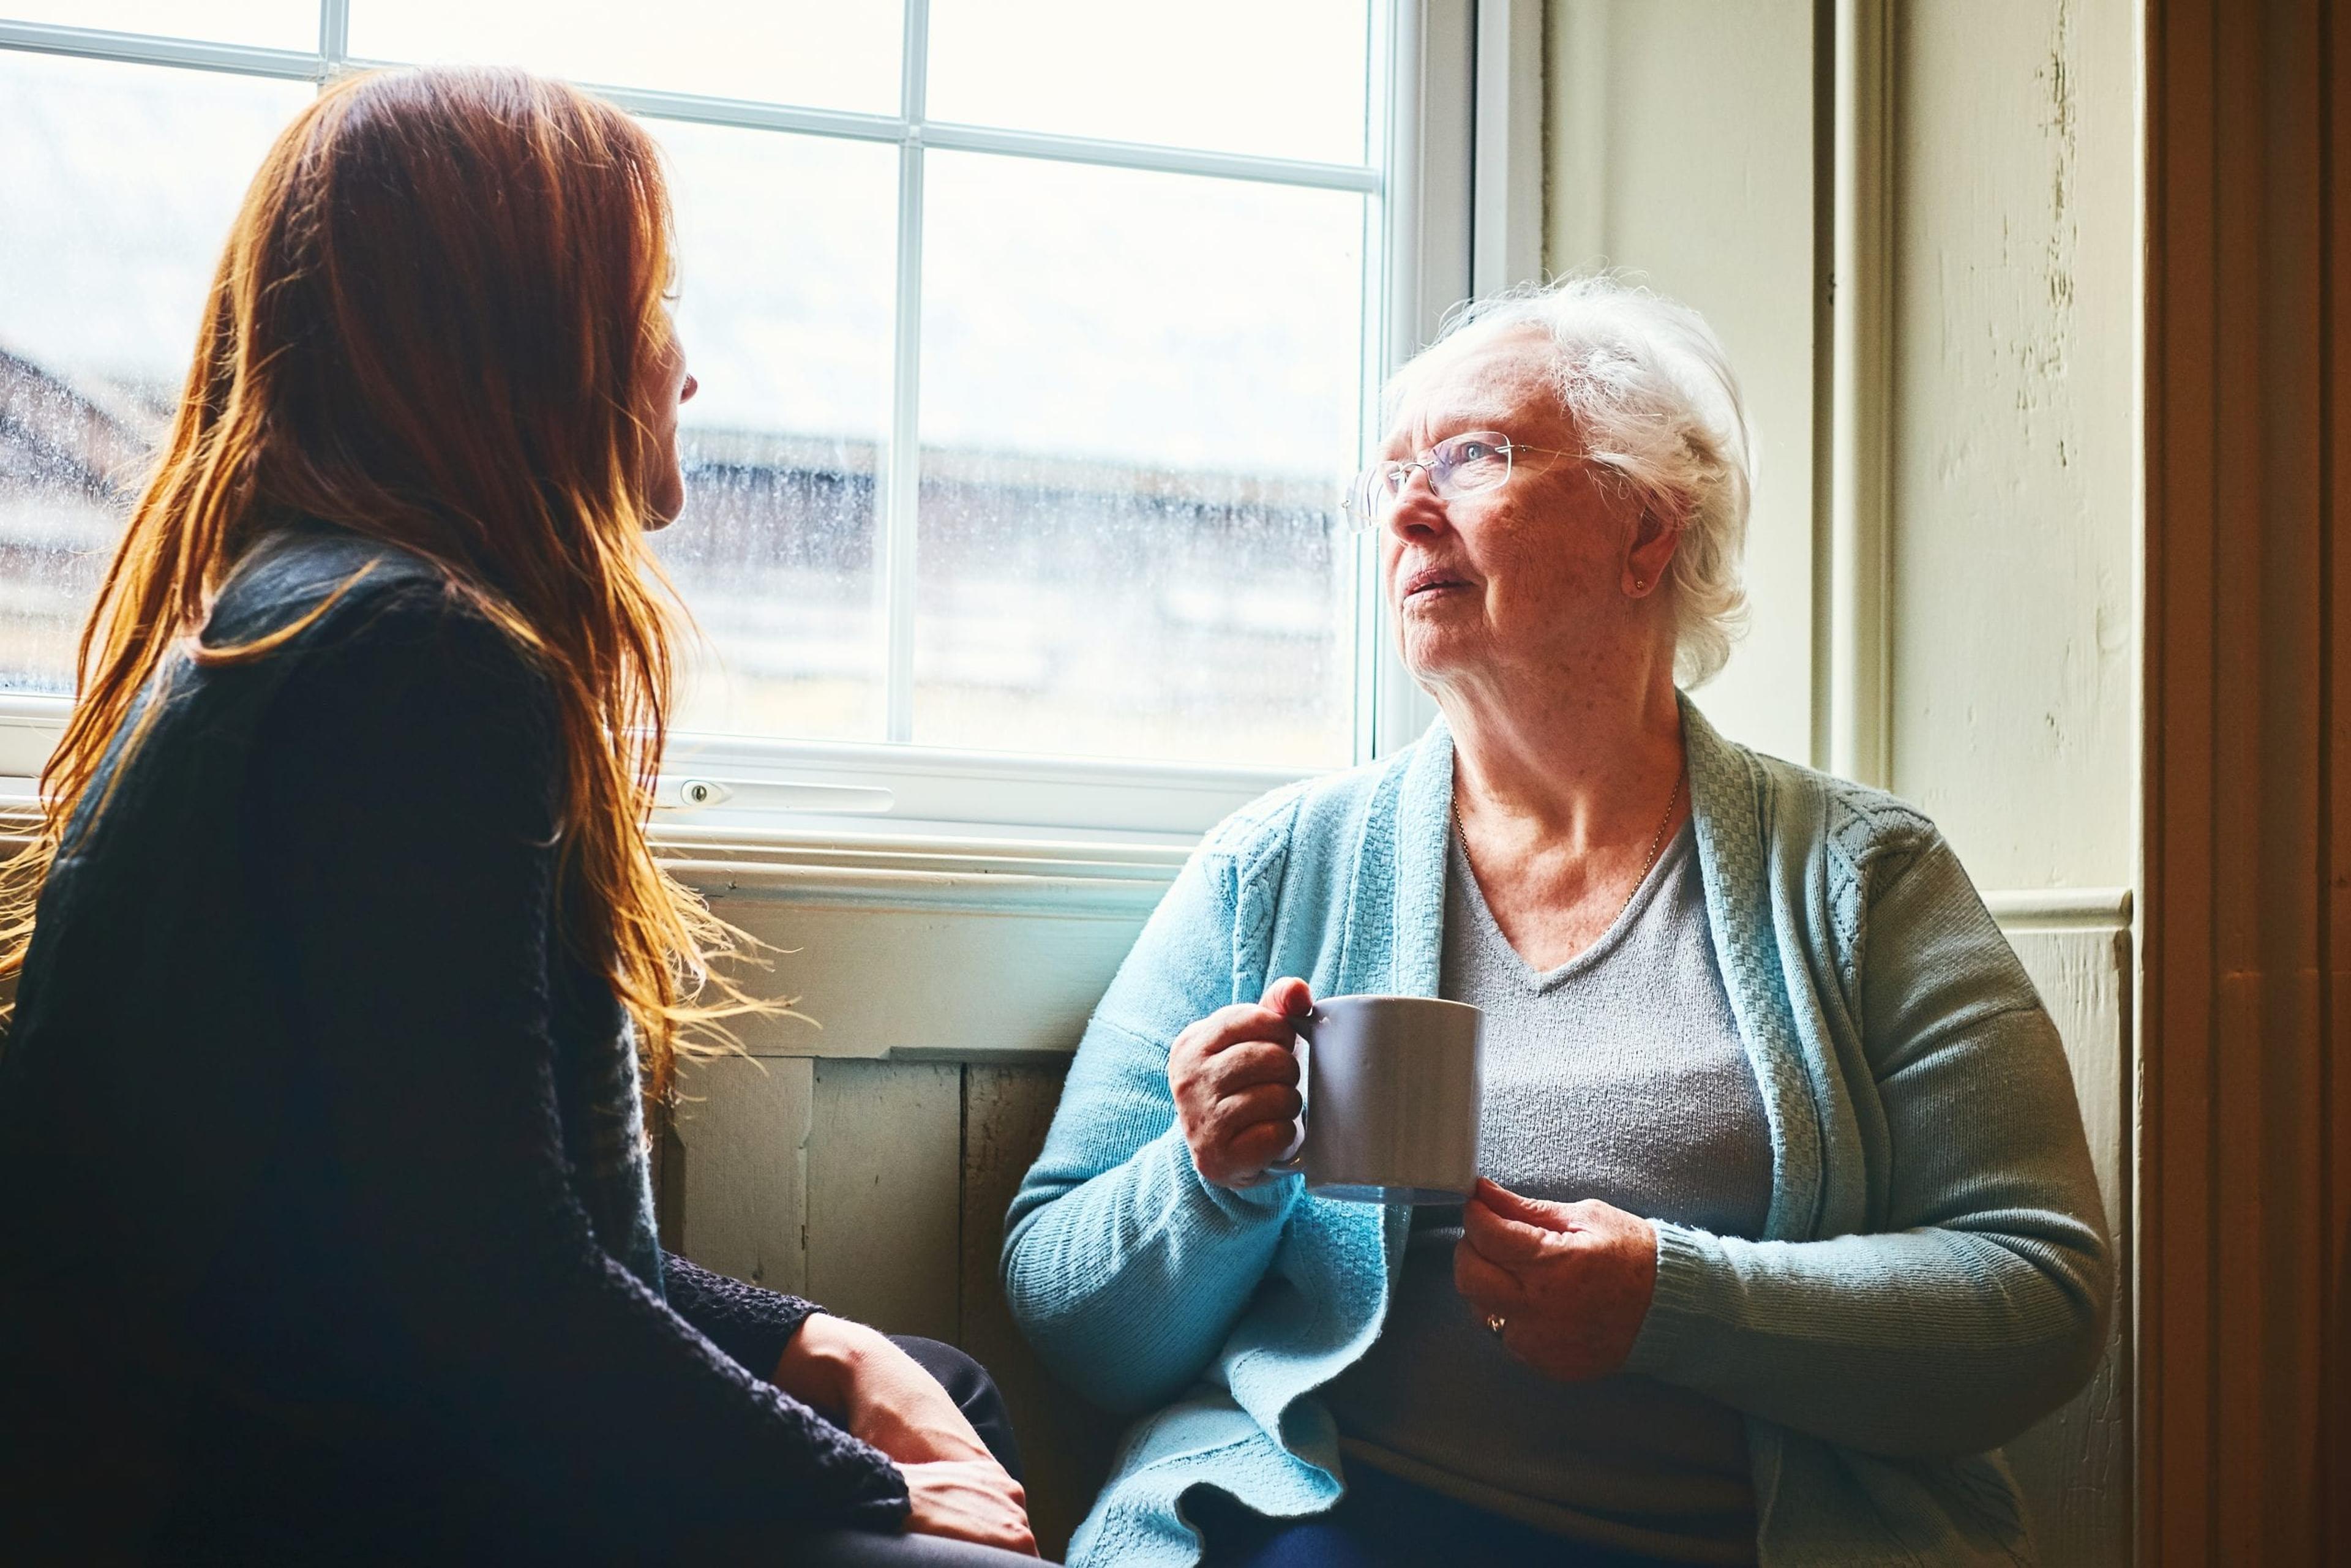 Older woman talking to a younger woman